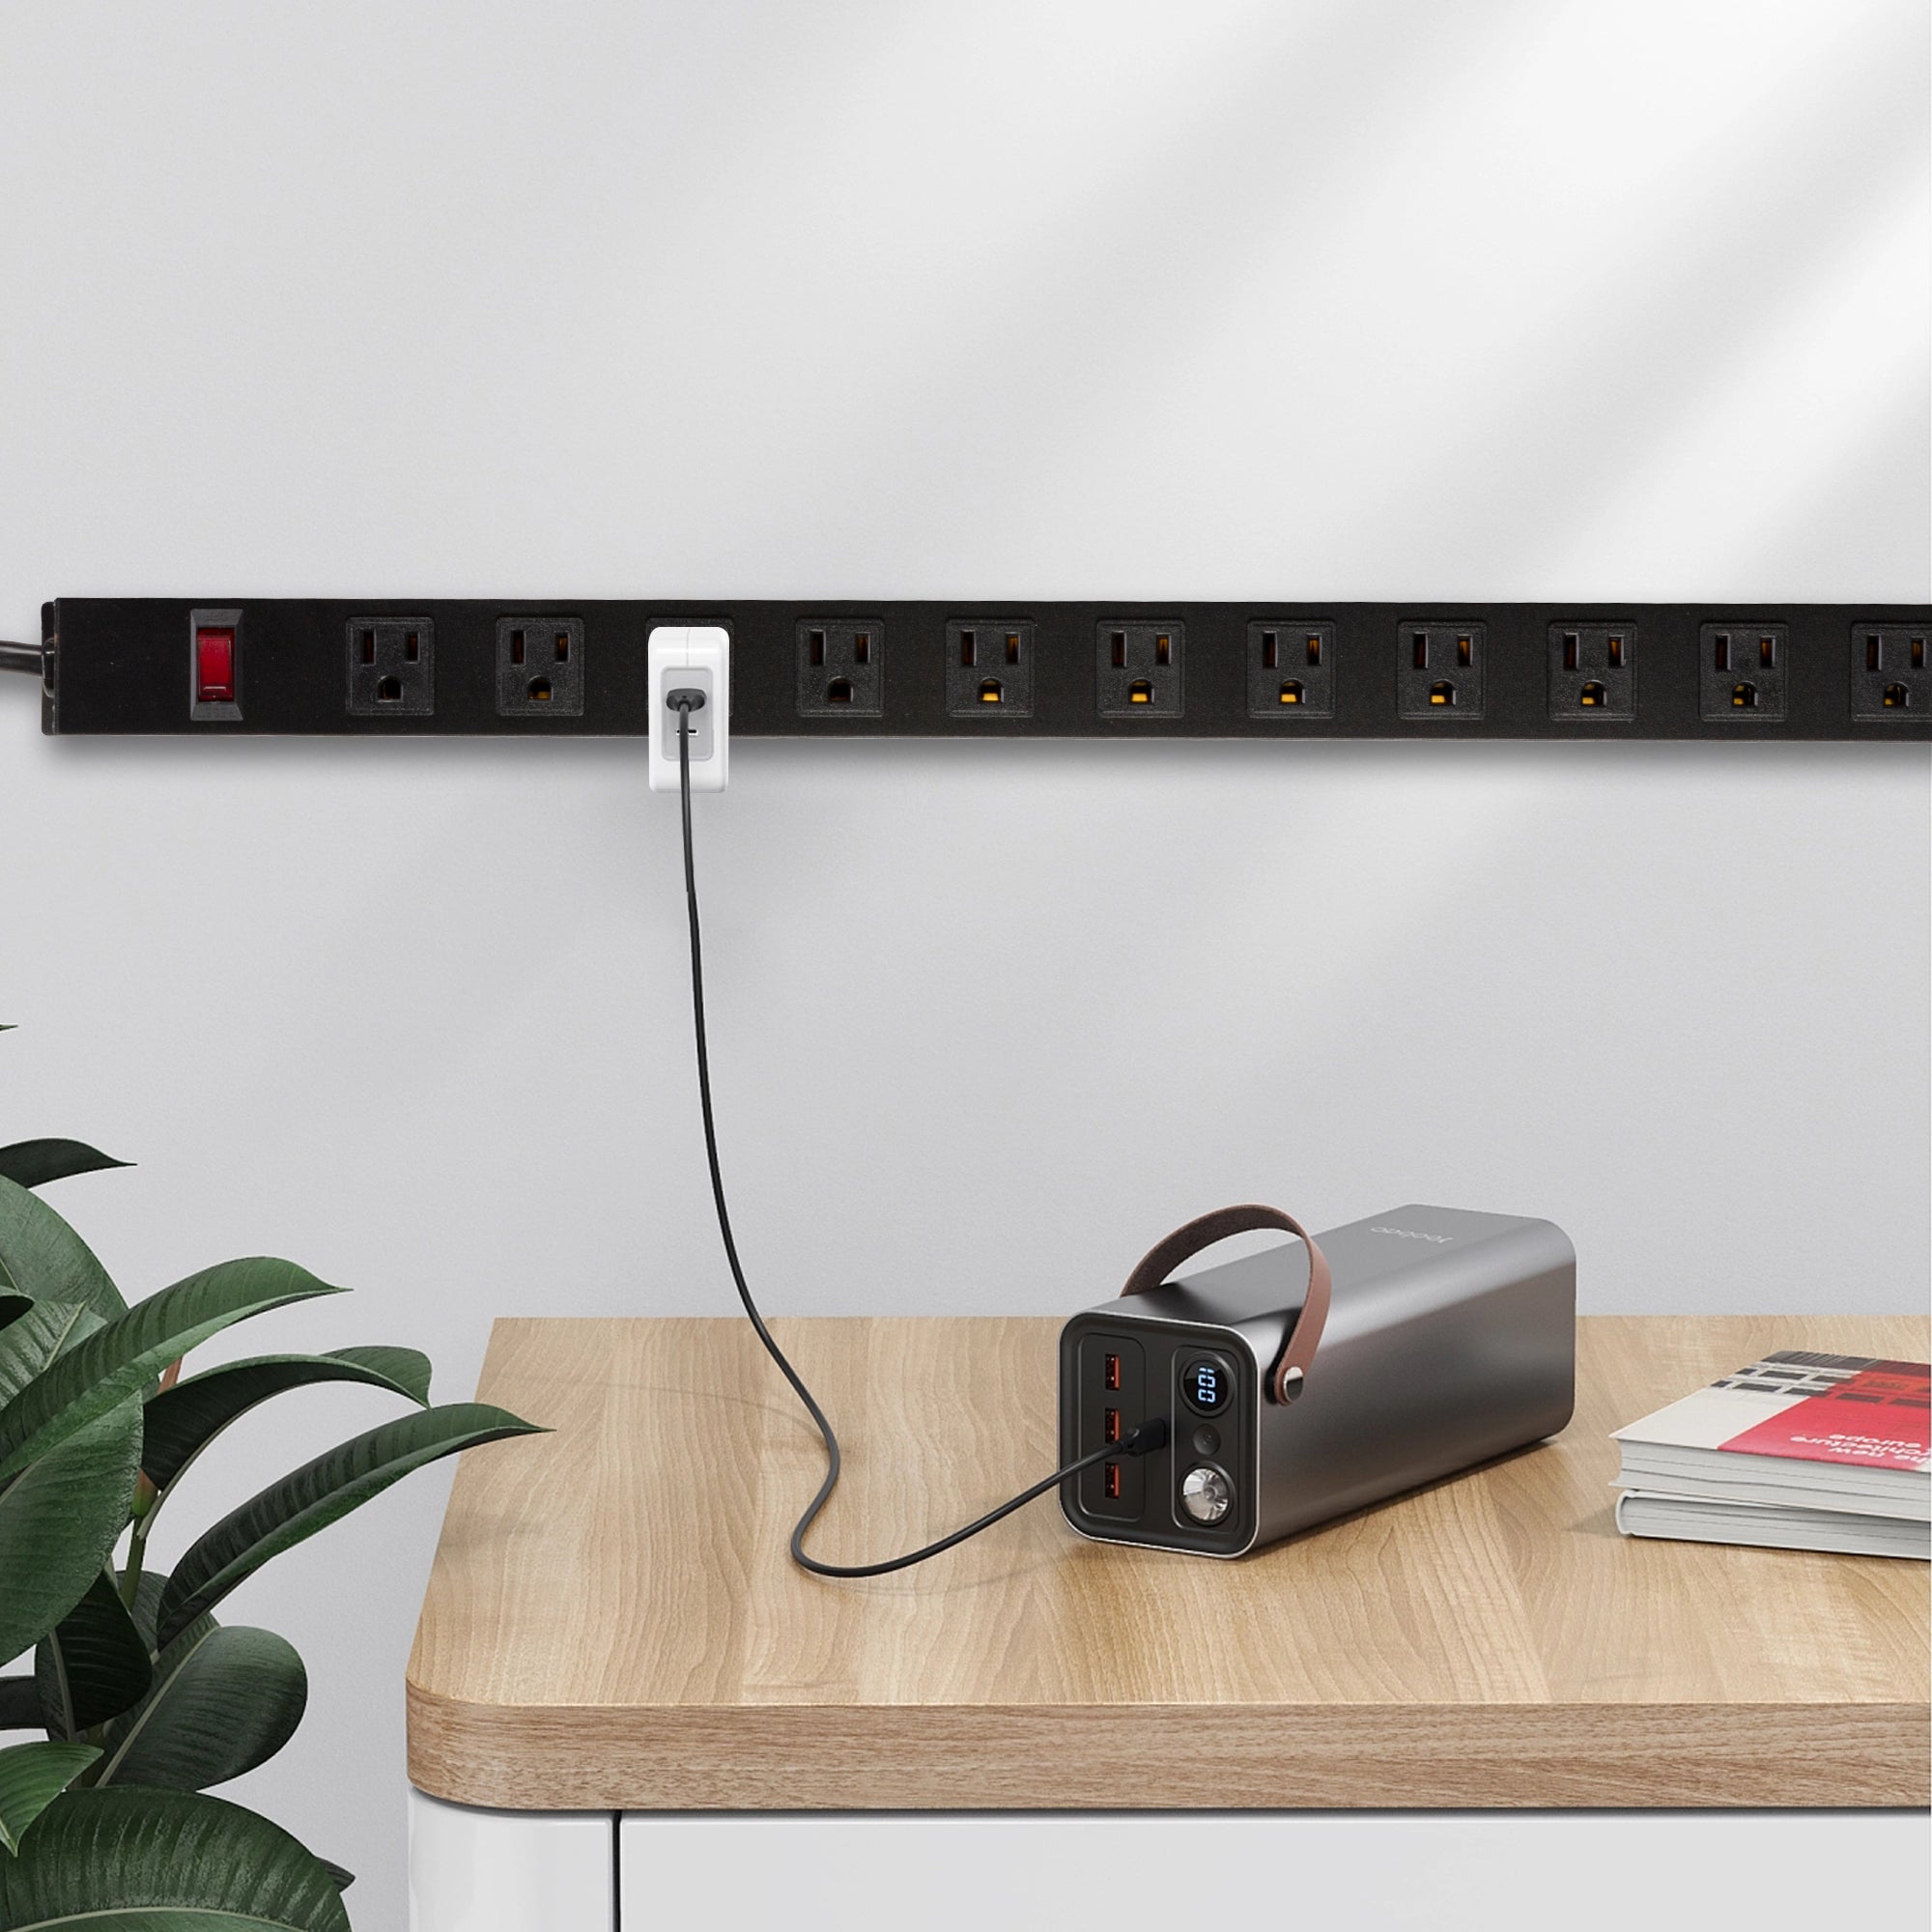 12 Outlets Power Strip Long Metal Power Outlet with 6ft Extension Cord Wall Mount, Black